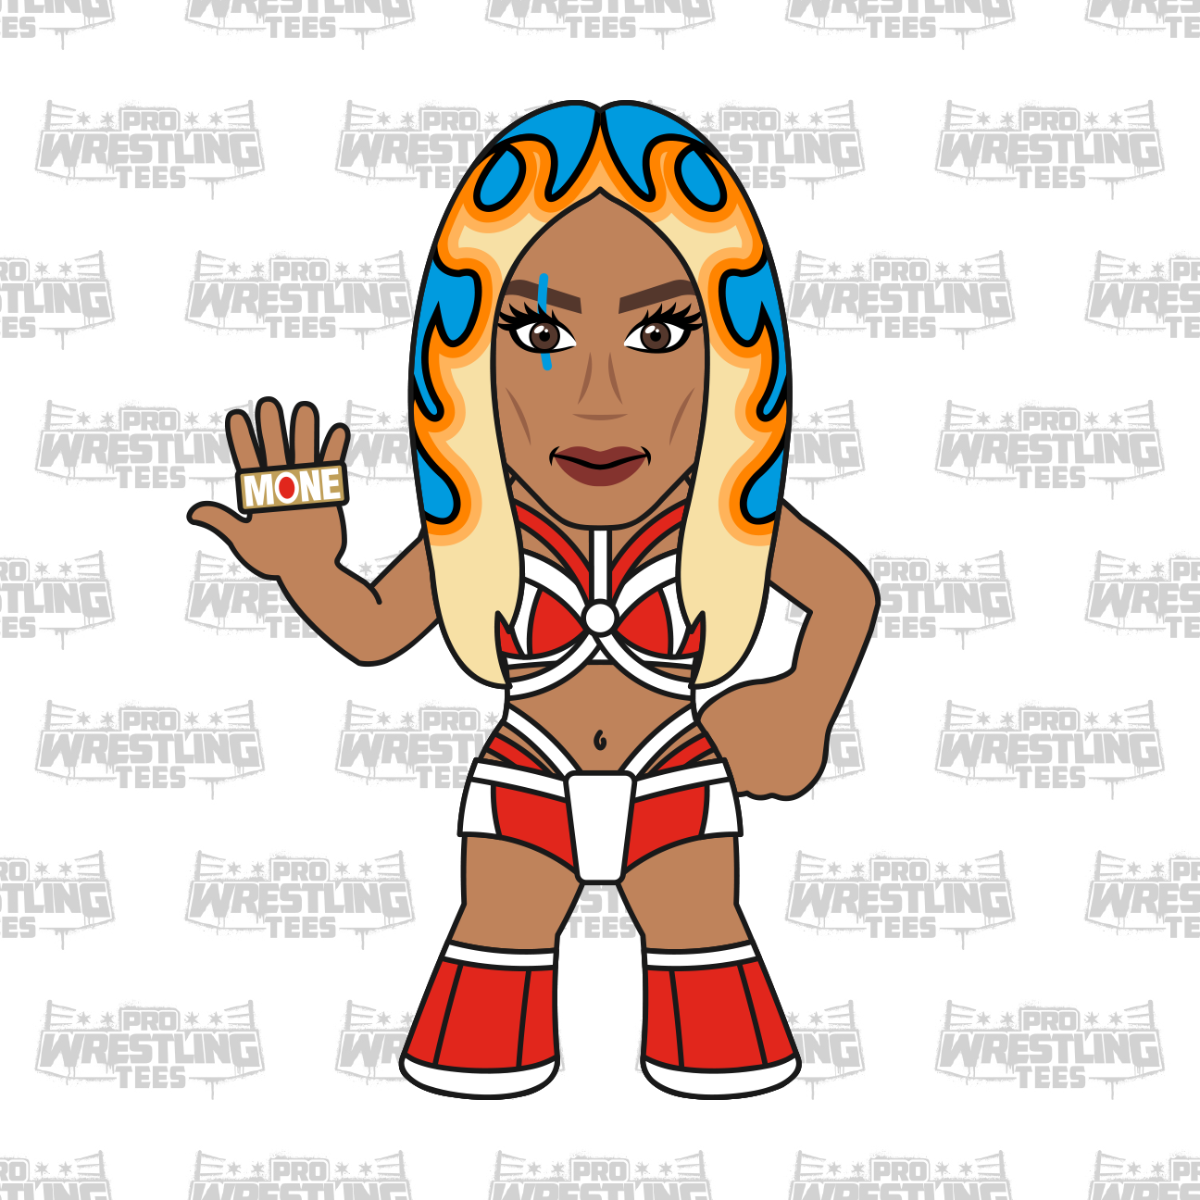 2023 Pro Wrestling Tees Limited Edition Micro Brawler Mercedes Moné